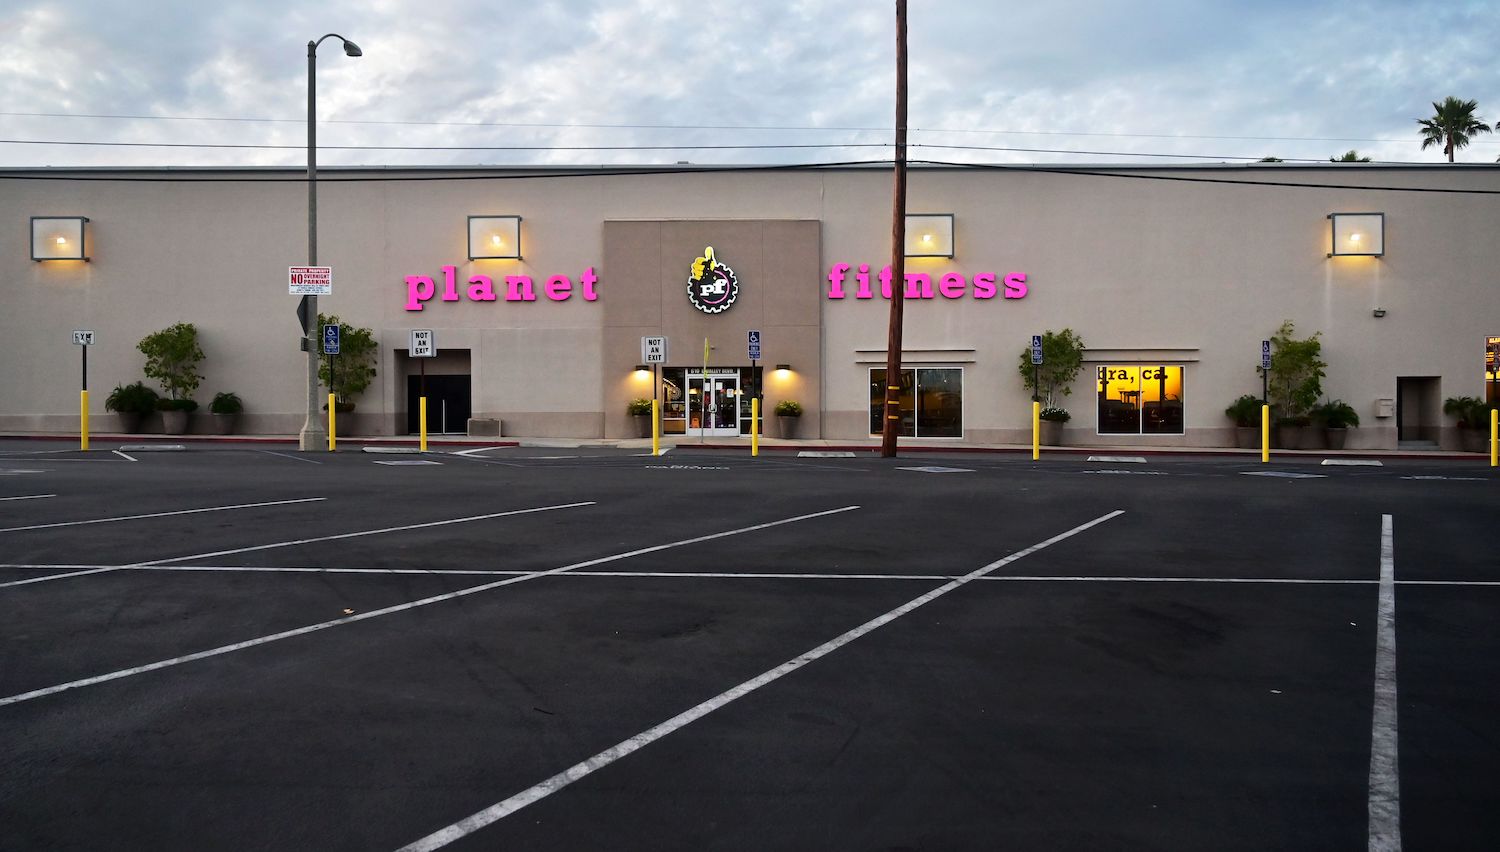 The empty Planet Fitness gym parking lot is not necessarily a legal place to sleep in your car. | Frederic J. Brown/AFP via Getty Images